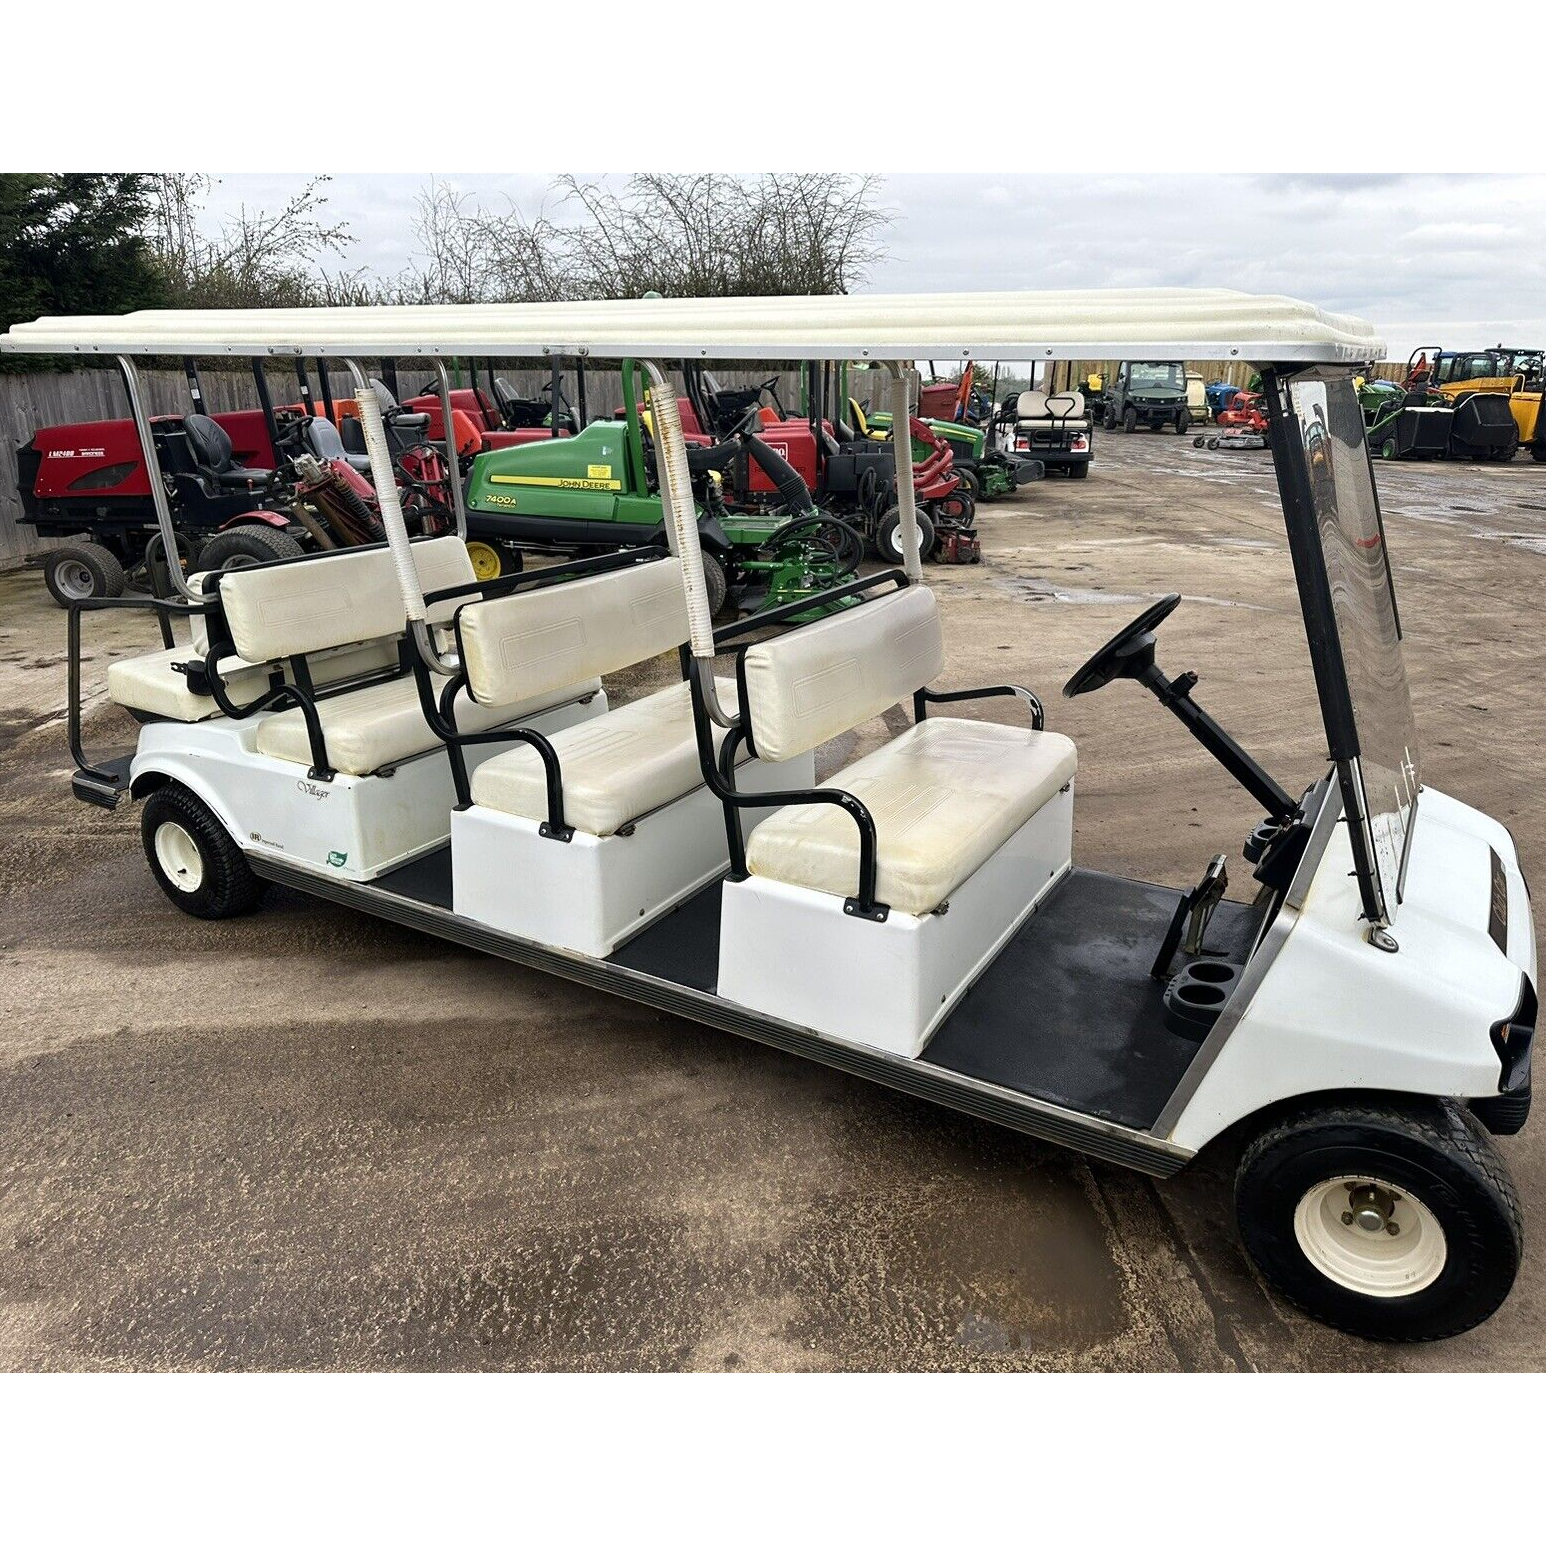 2015 CLUBCAR VILLAGER 48V ELECTRIC BATTERY POWERED PEOPLE CARRIER GOLF BUGGY